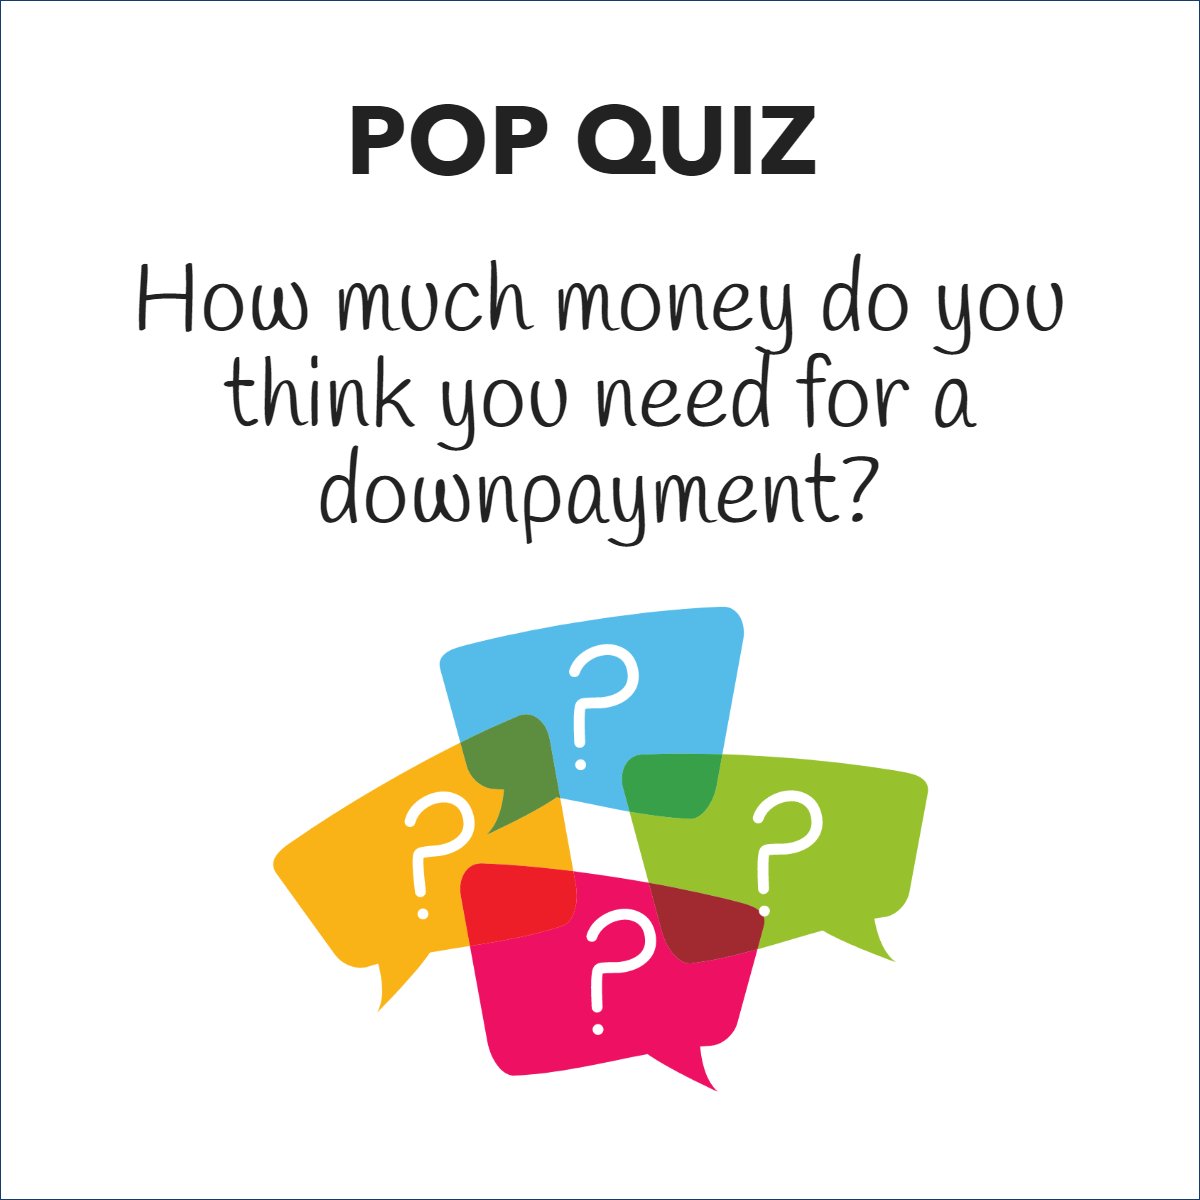 Fast Fact:

While a 20% down payment was once the standard, many homebuyers now pay 5% or less. 💰

#realestate #realestatetips #downpayment #downpaymentassistance #popquiz #realestate101
 #whoyouworkwithmatters